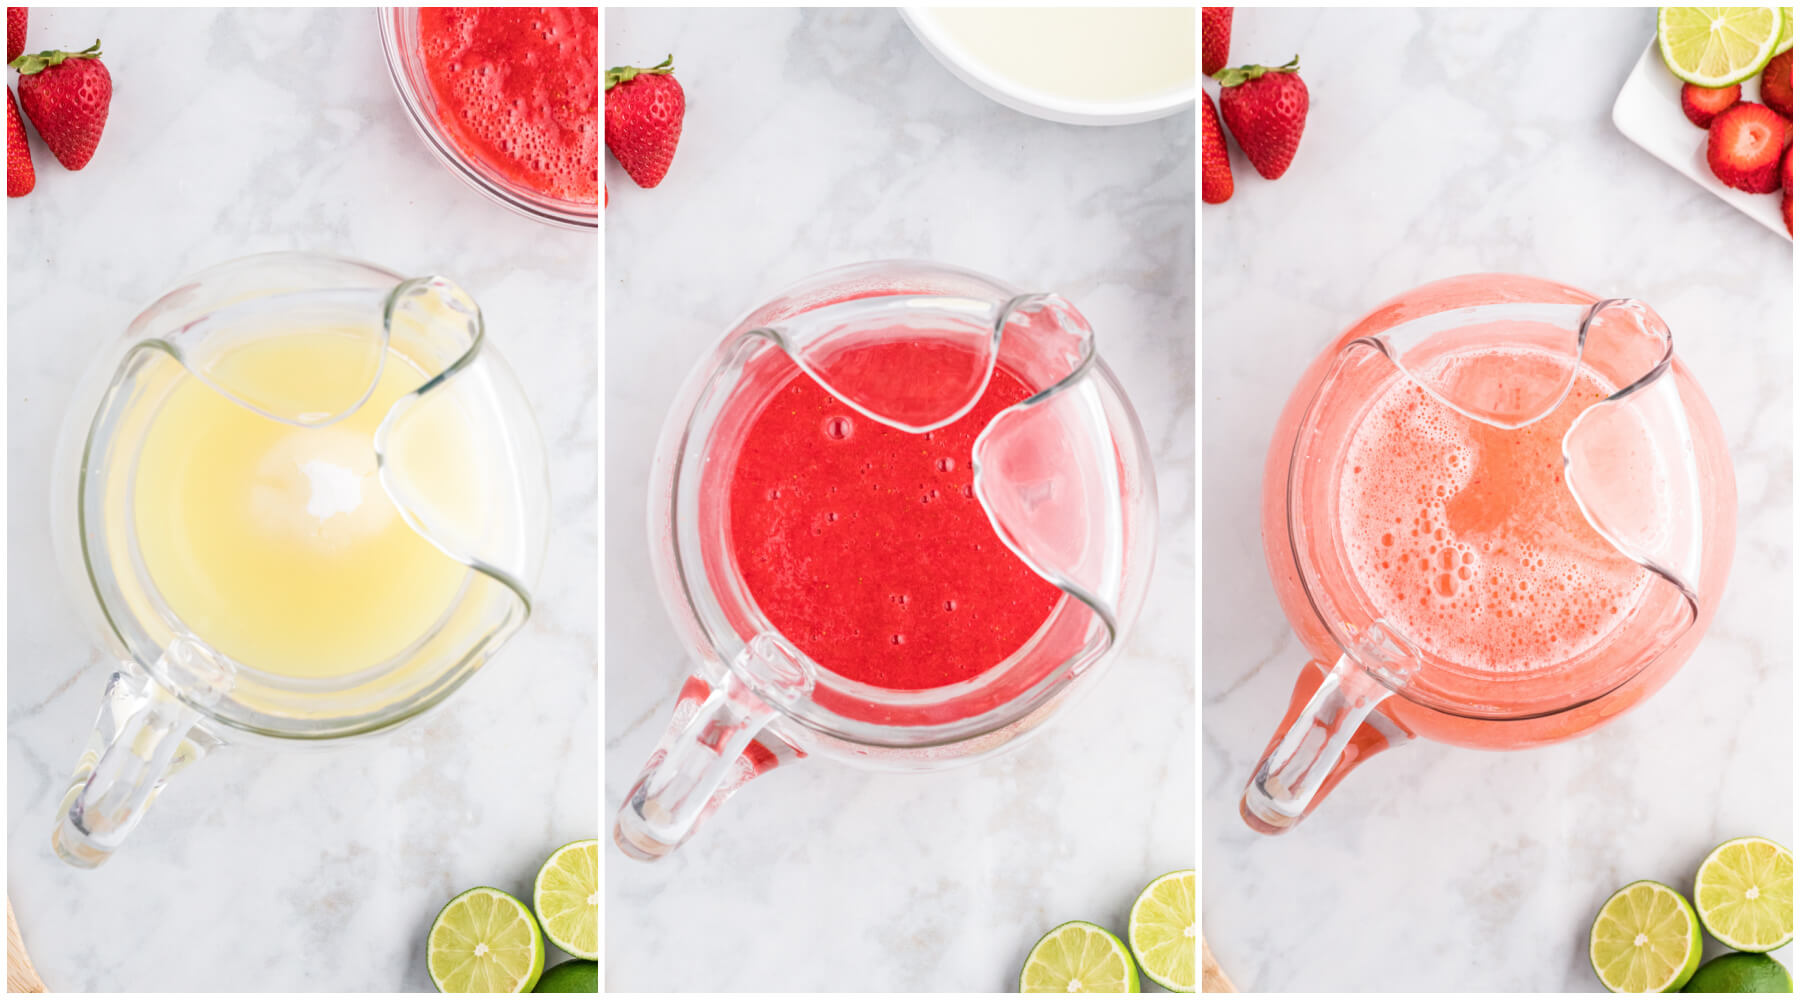 Process photos showing how to mix up strawberry limeade.